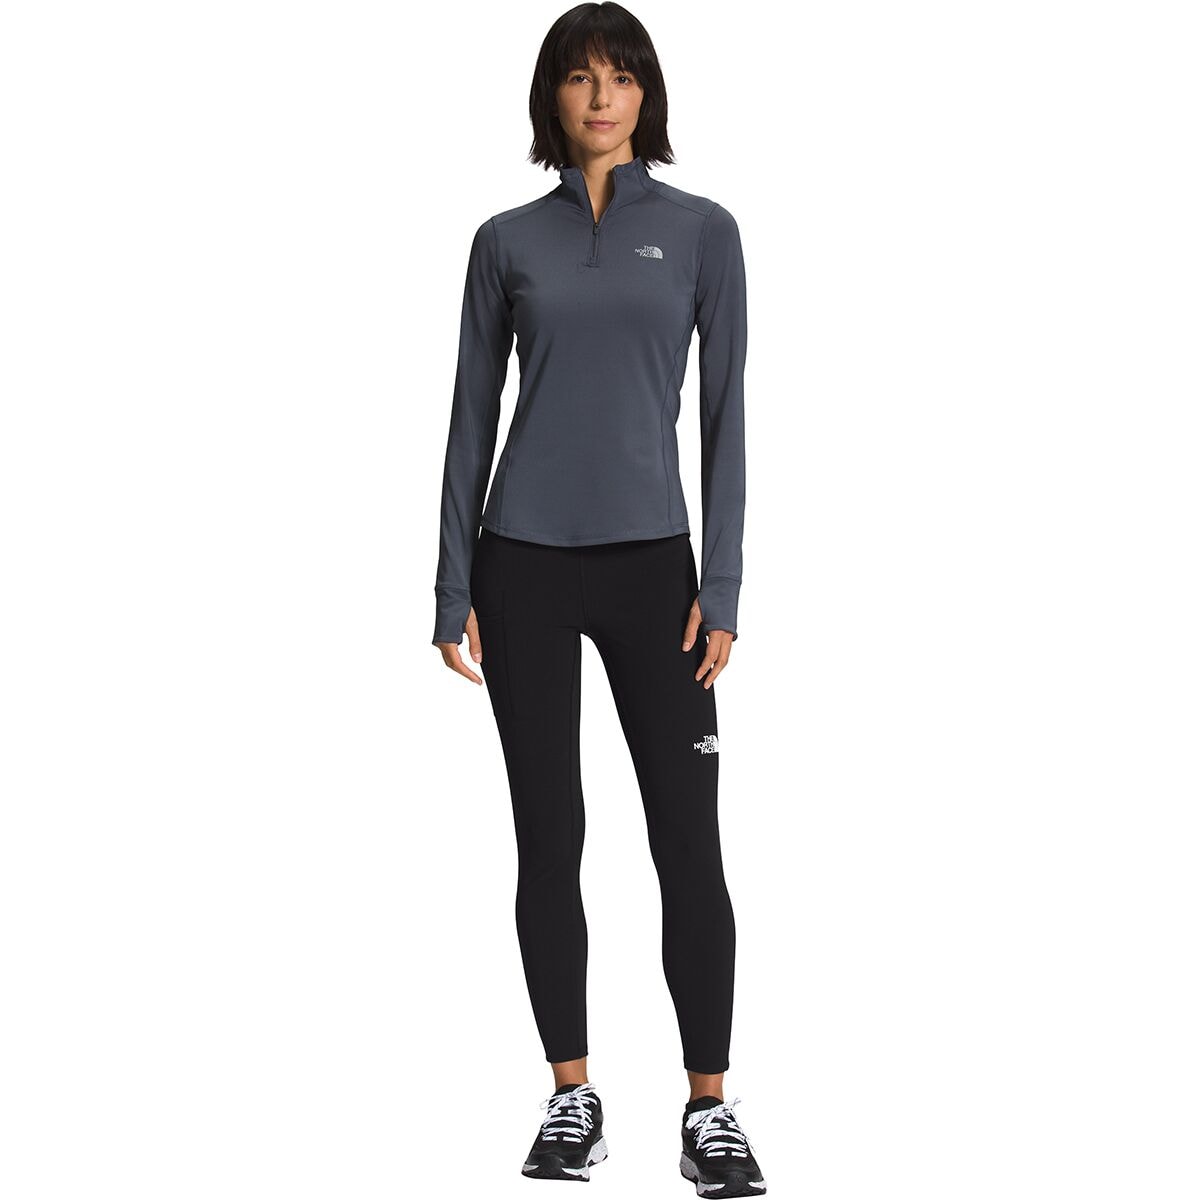 The North Face Winter Warm Tight - Women's - Clothing